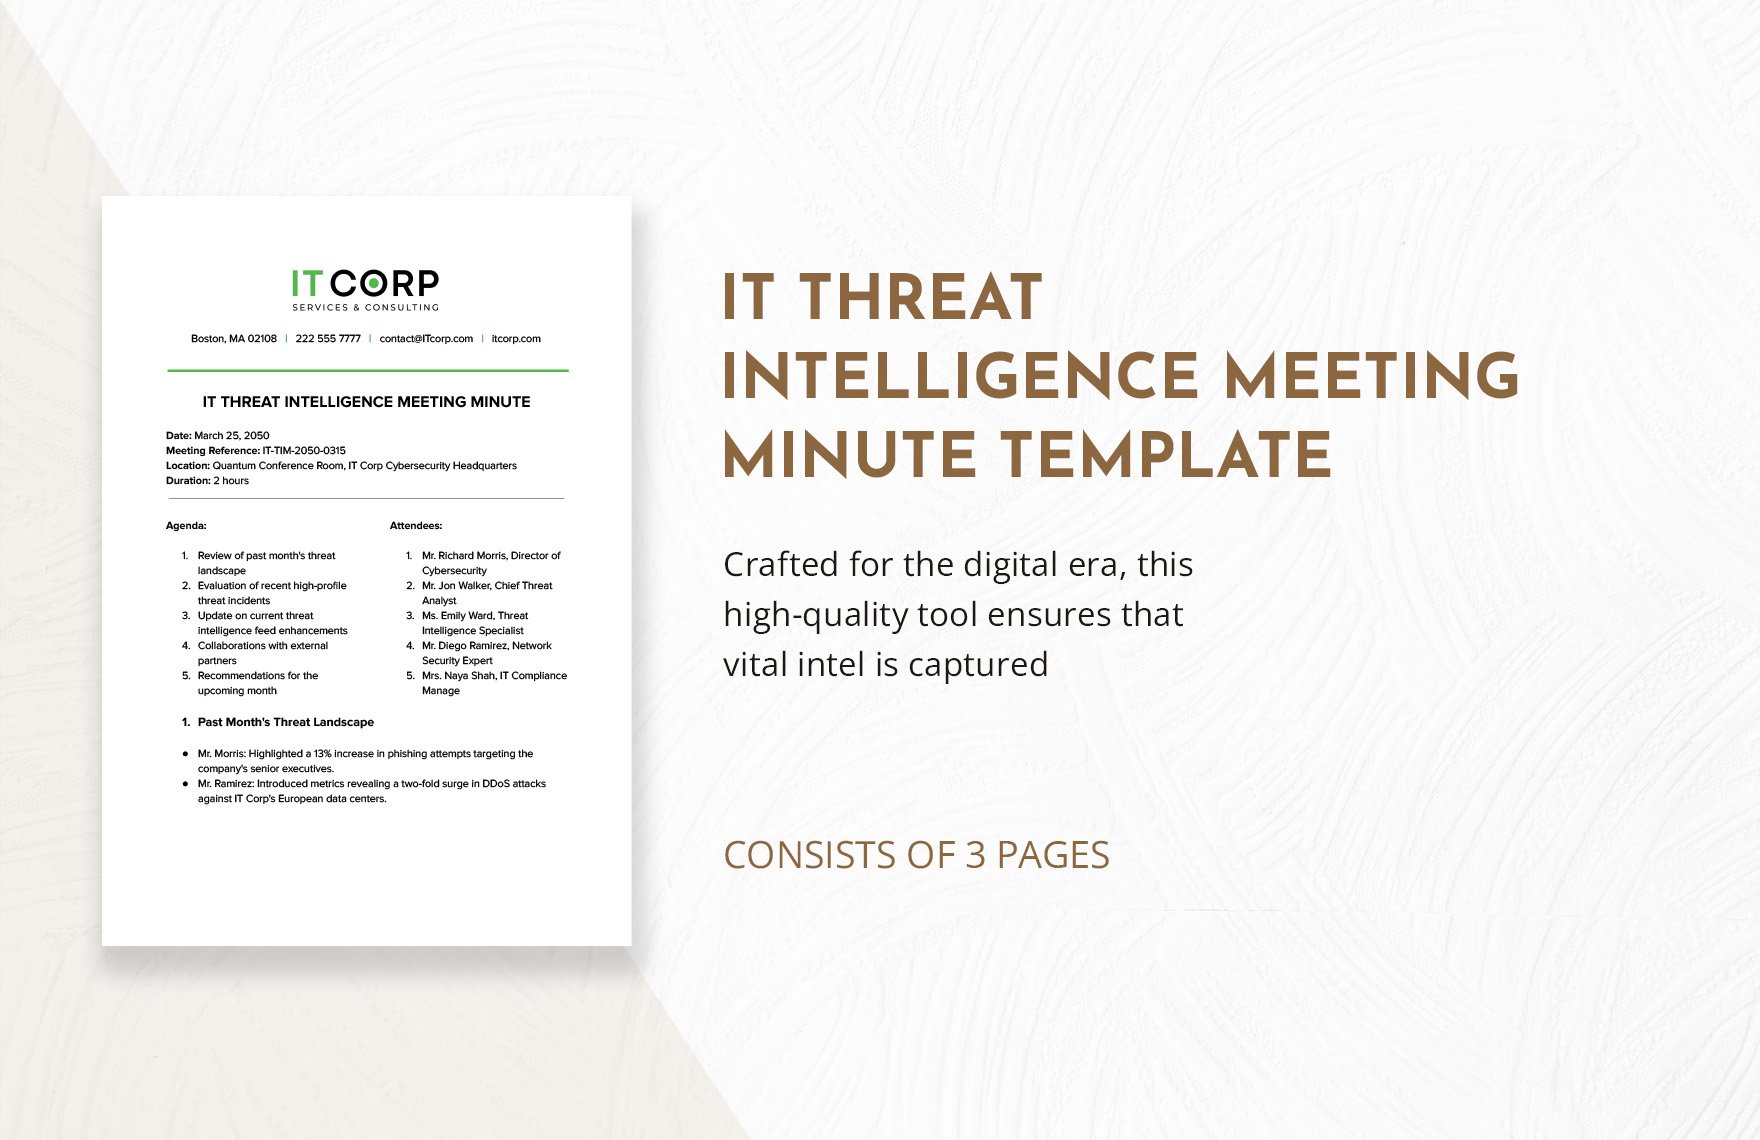 IT Threat Intelligence Meeting Minute Template